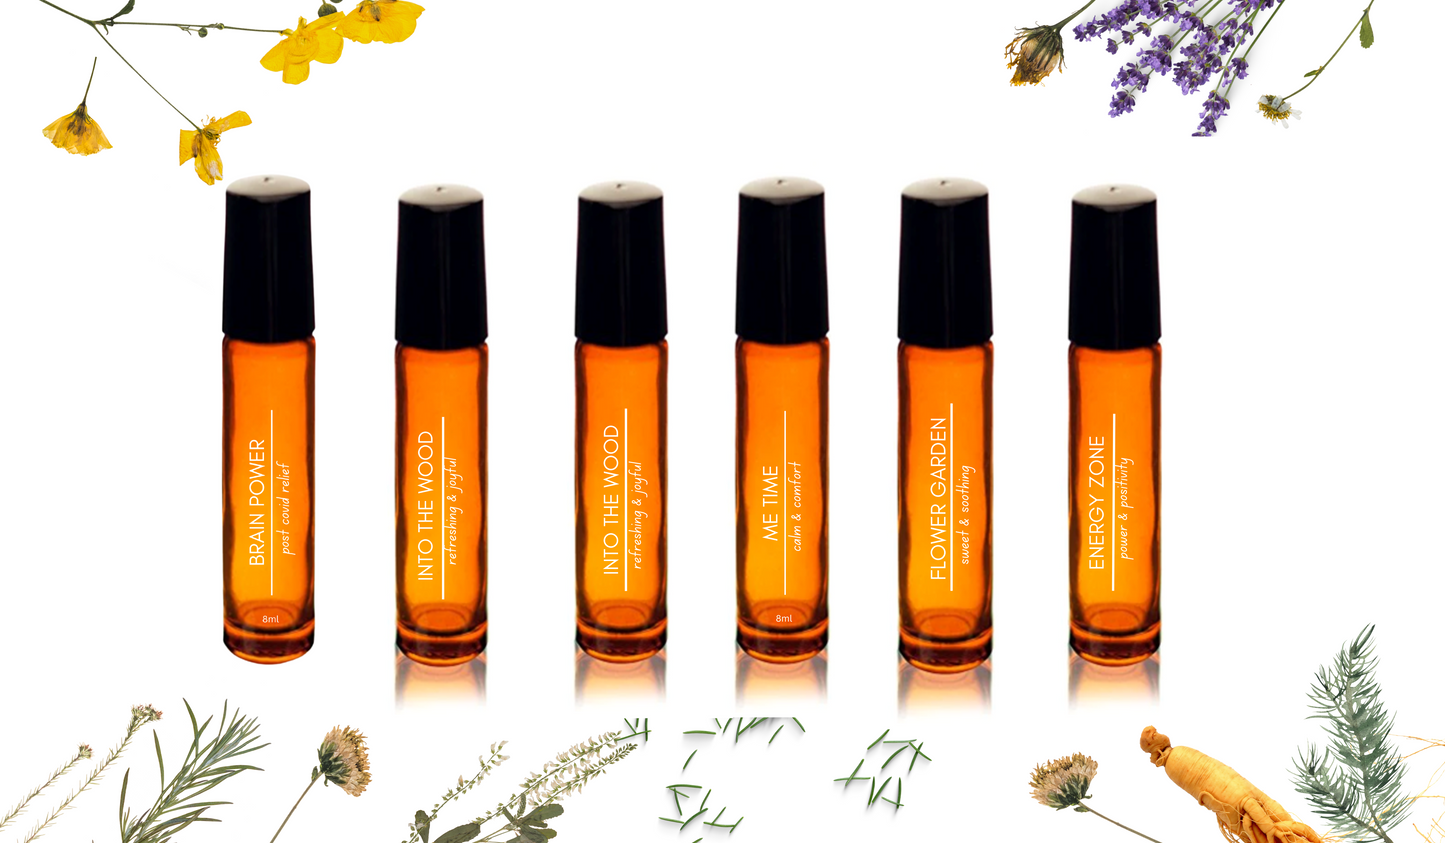 6 refill essential oil solutions set - mixed scent